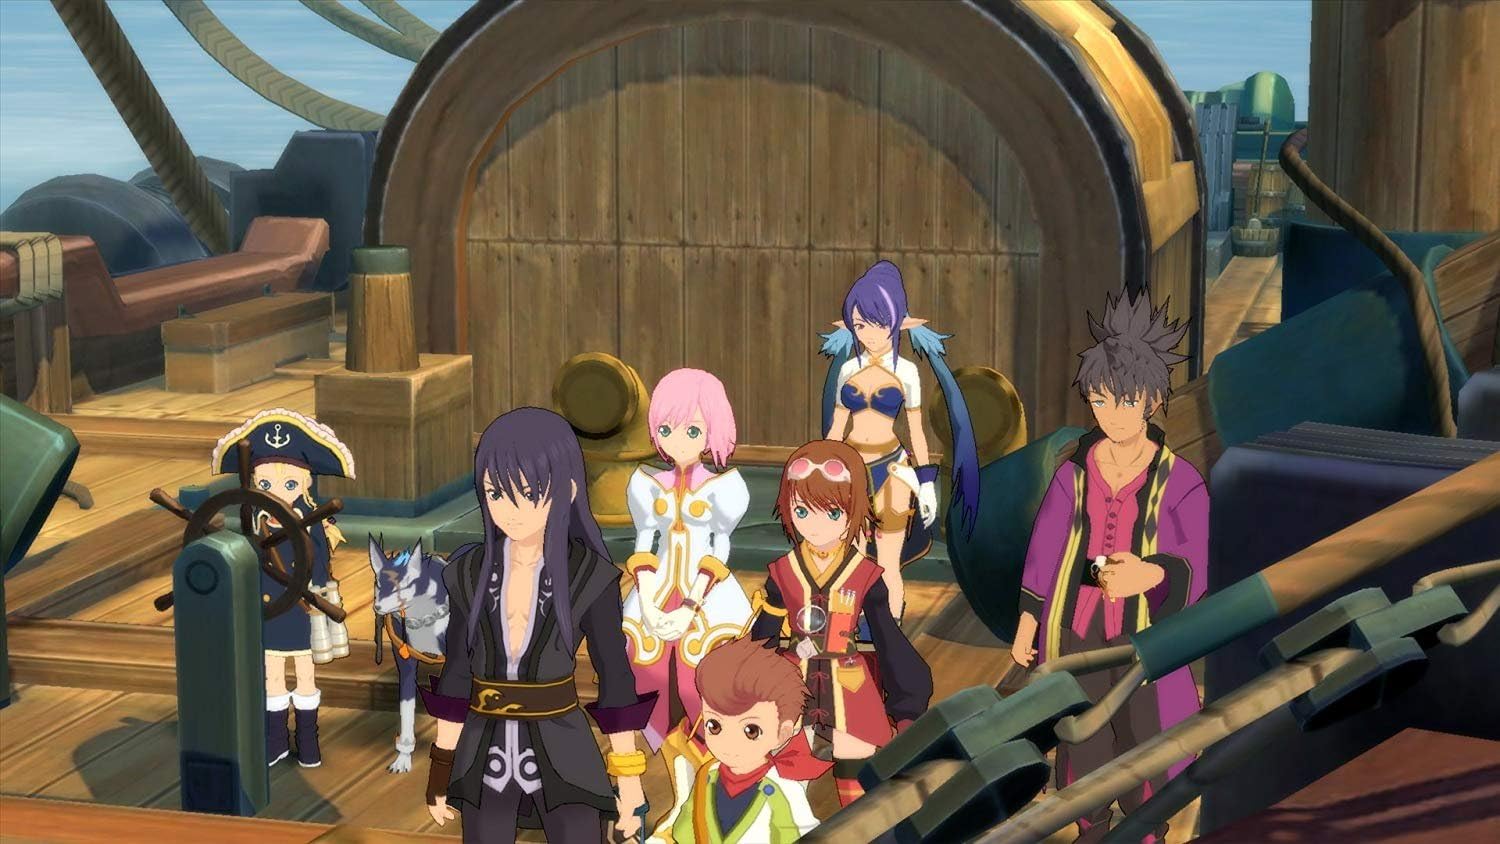 Tales of Vesperia - Definitive Edition - Nintendo Switch, 0722674840040 - image 2 of 5